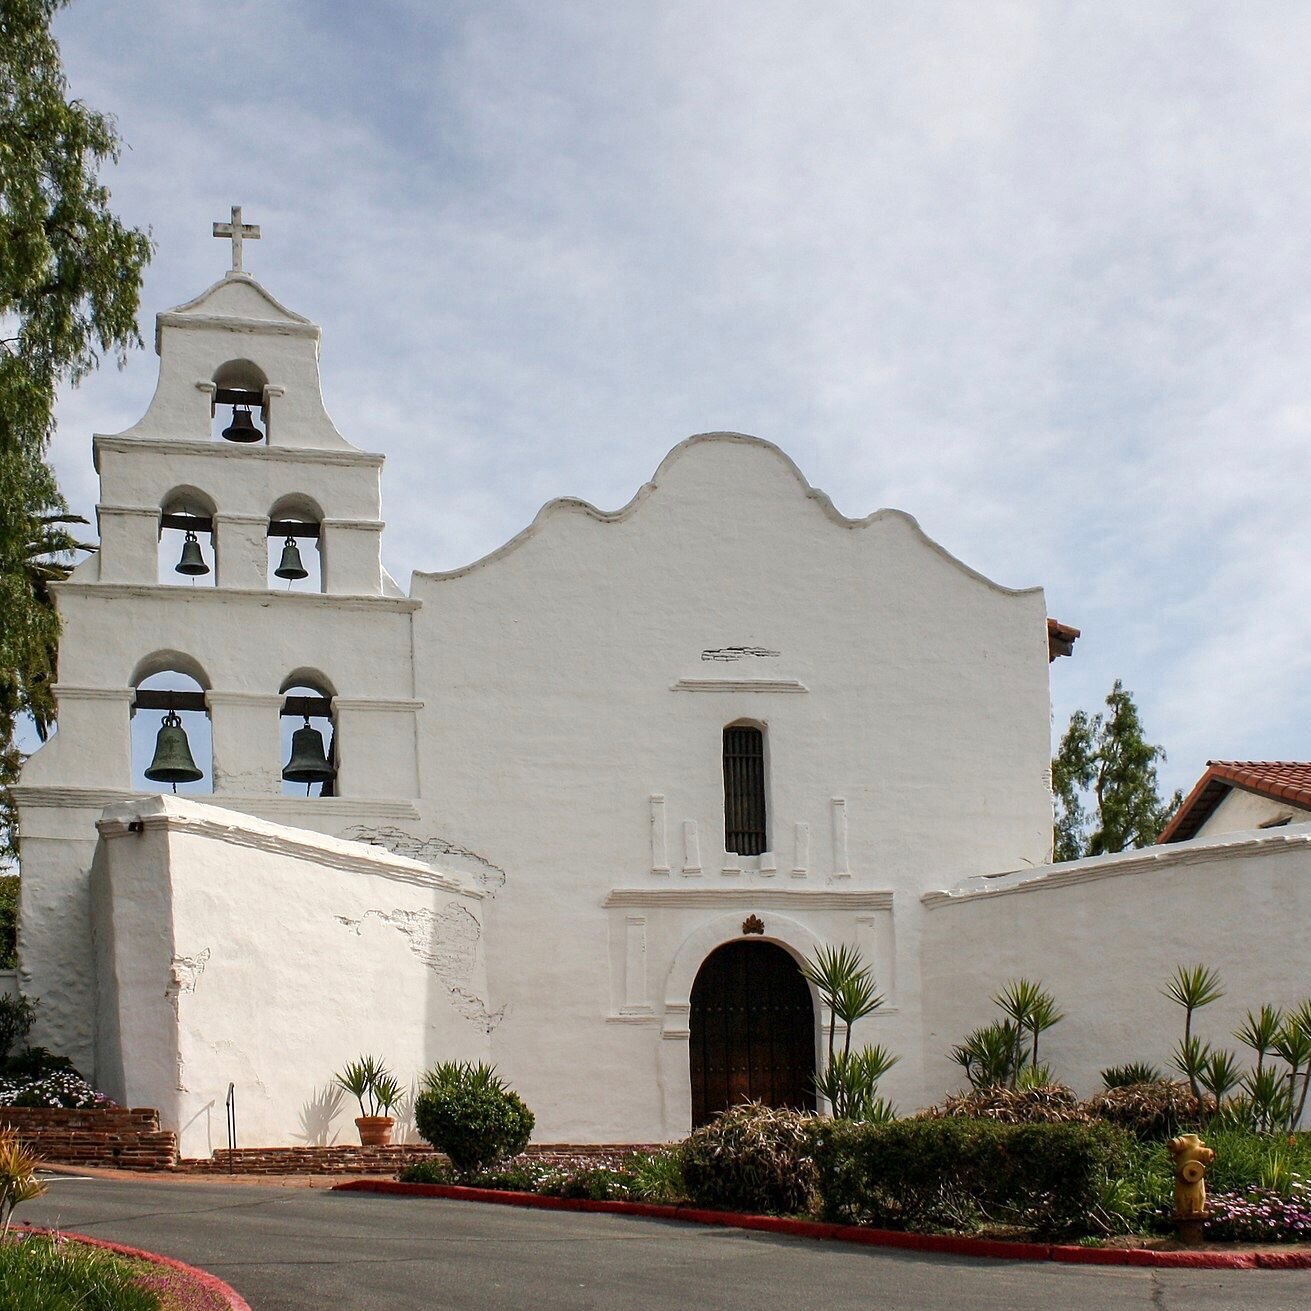 ON THIS DAY
On July 16, 1769, Father Jun&iacute;pero Serra founded the first mission in the modern-day State of California: Mission San Diego de Alcal&aacute;. #OTD